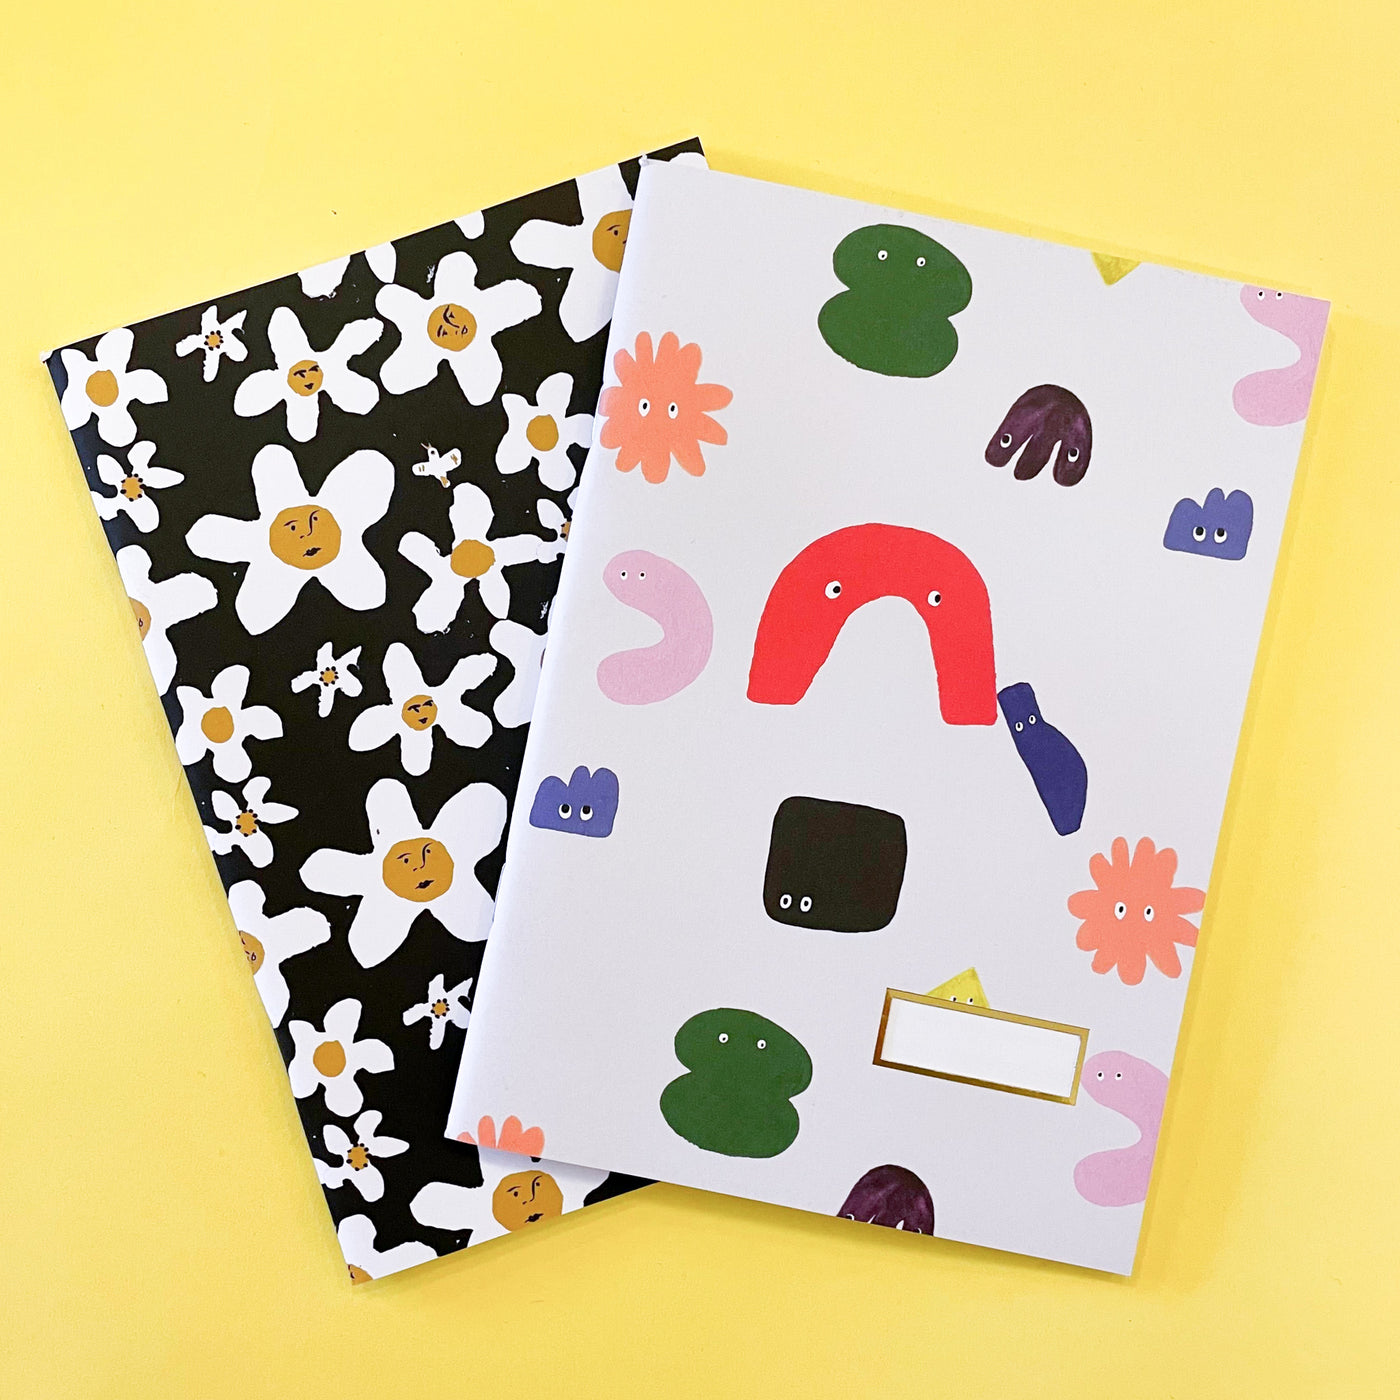 Set of two notebooks with funny face illustrations on the cover by Atelier Mave